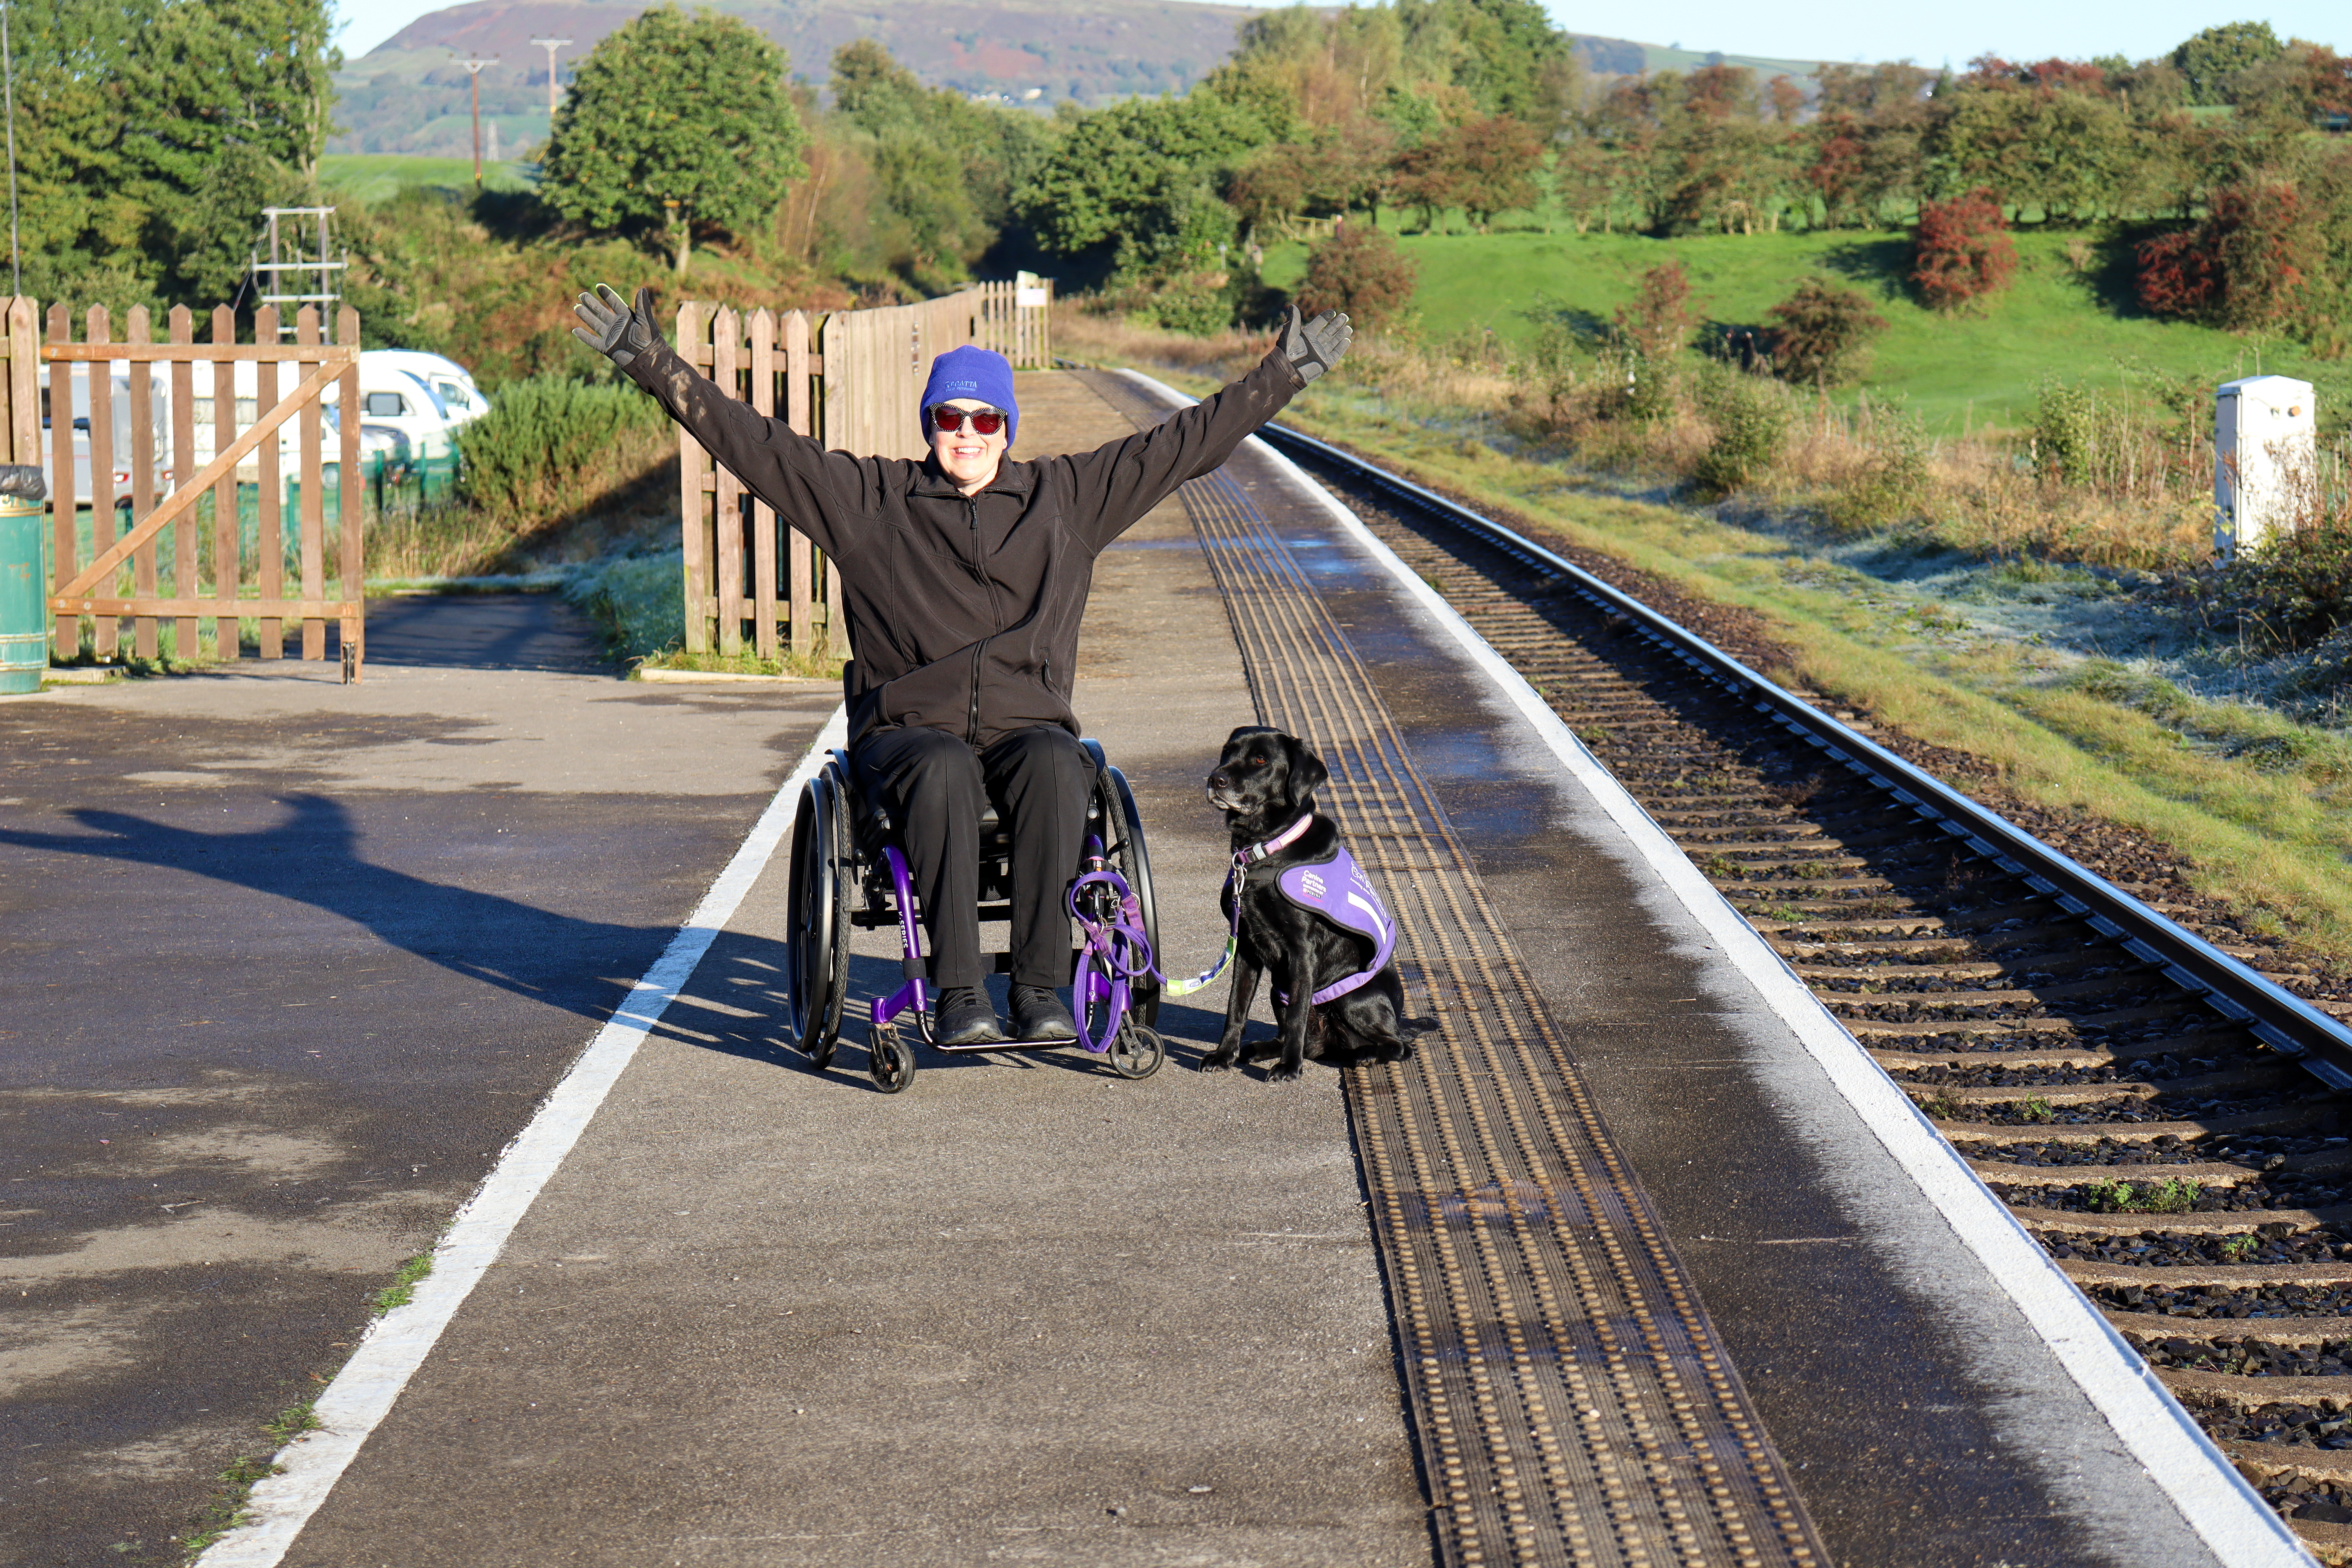 Burrs Country Park railway platform which is beautifully clean and tidy. Nicki is in her wheelchair looking excited, with her assistance dog, Liggy beside her.